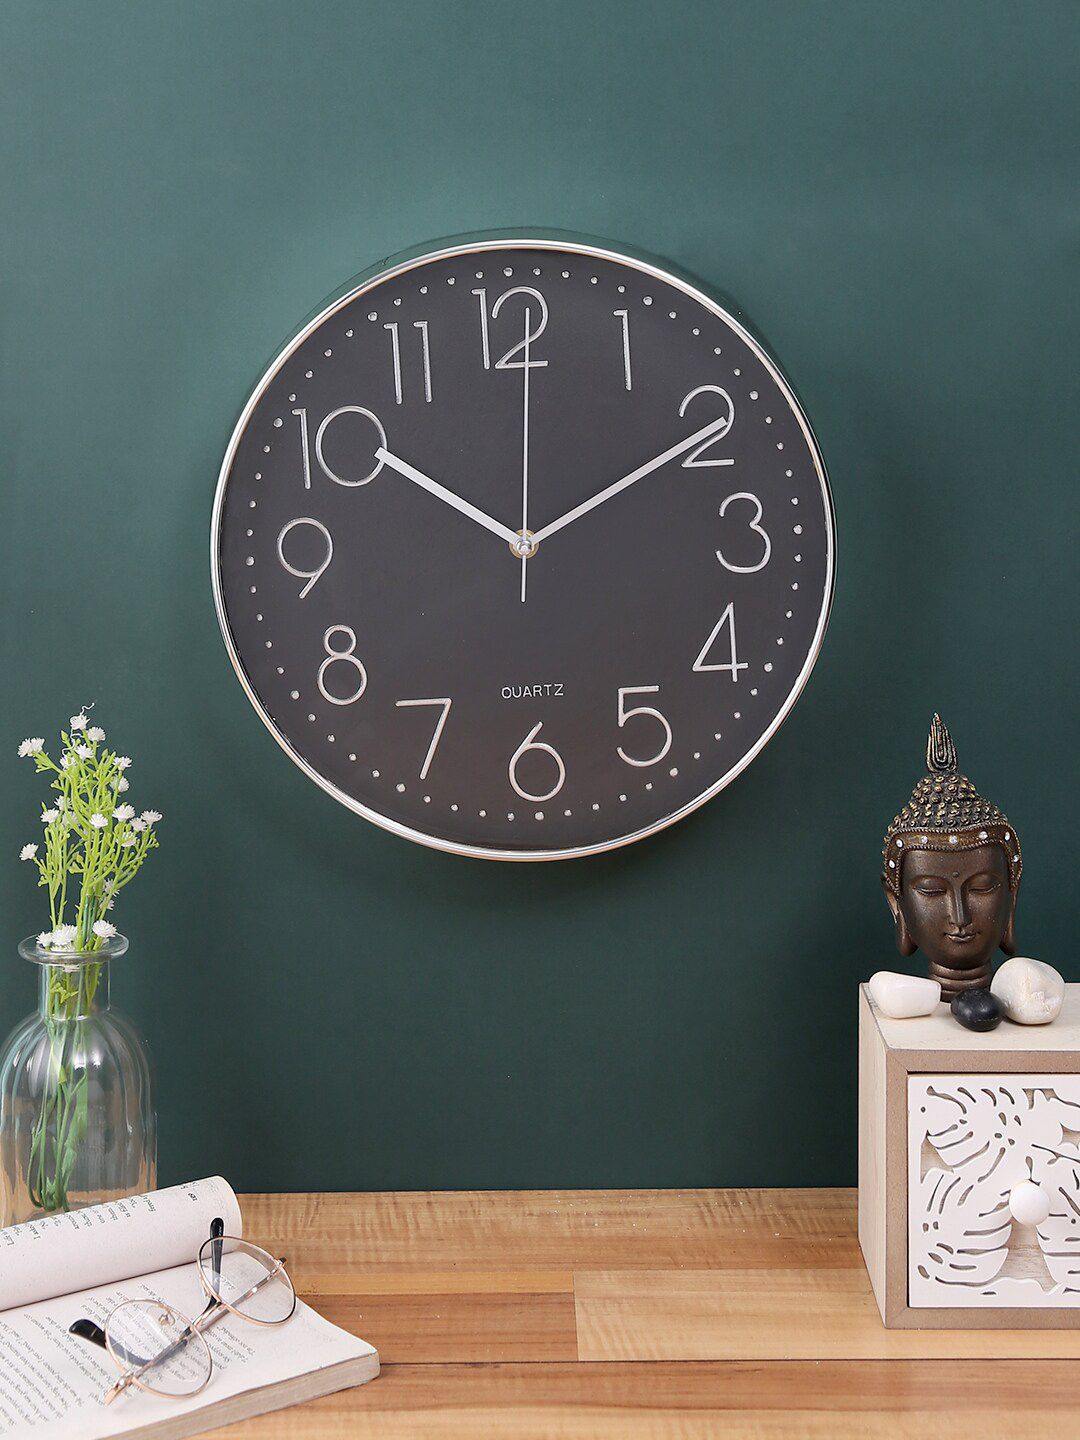 House Of Accessories Black Contemporary Wall Clock Price in India